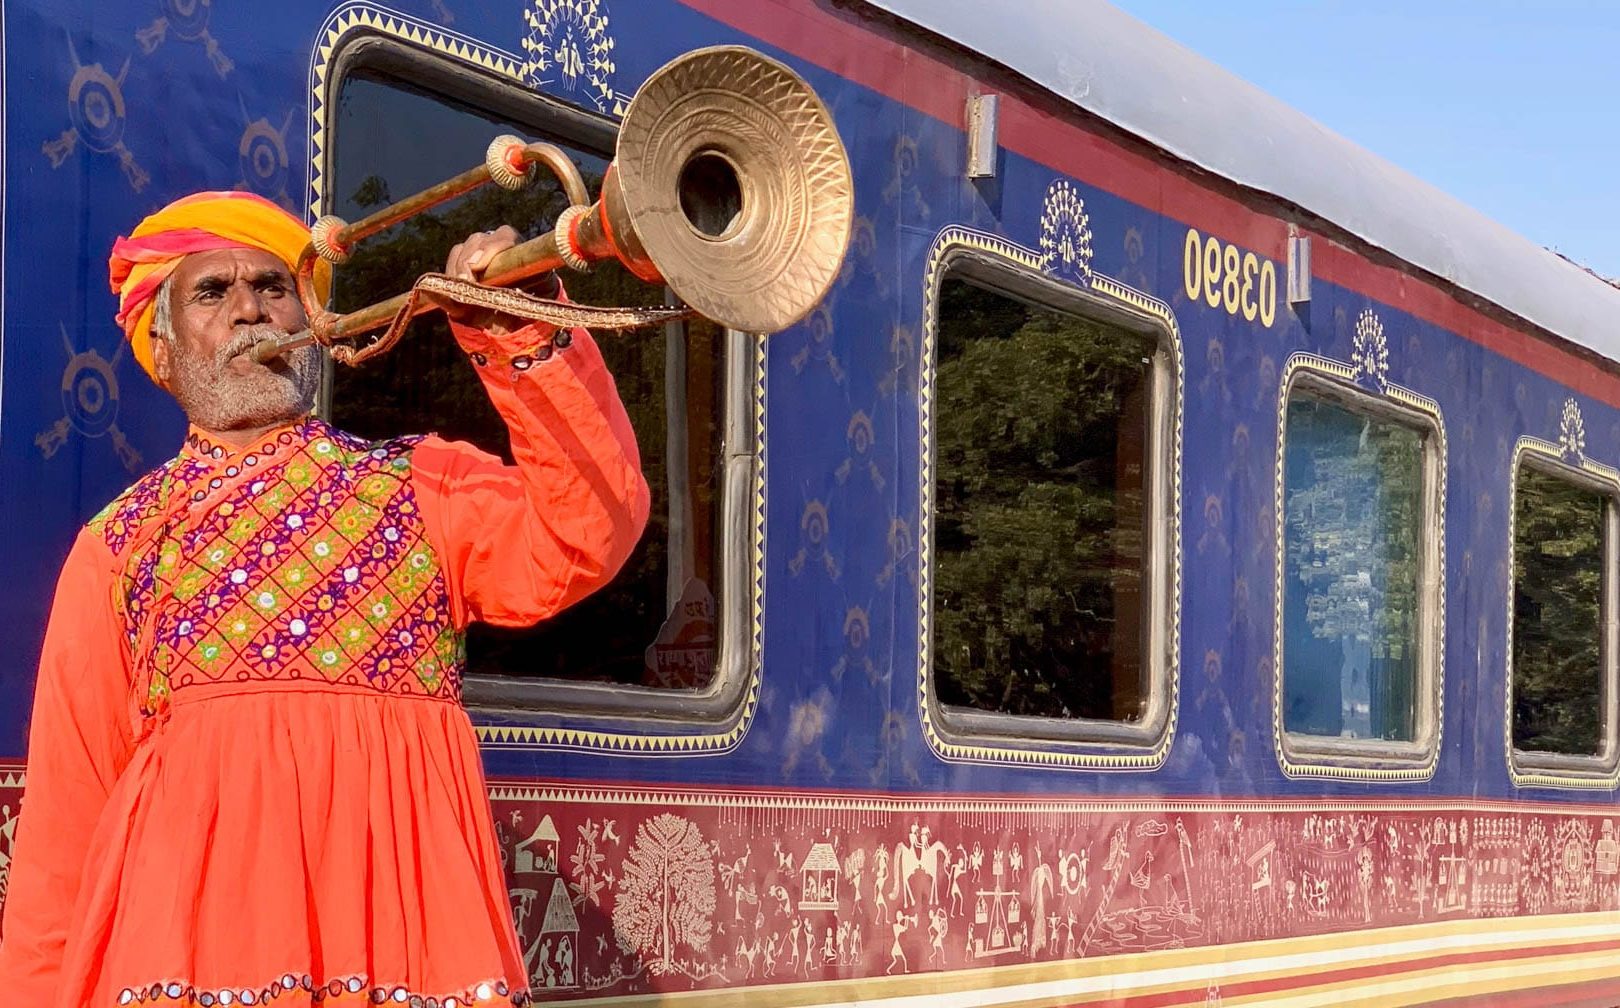 Man playing an instrument by the Deccan Odyssey train